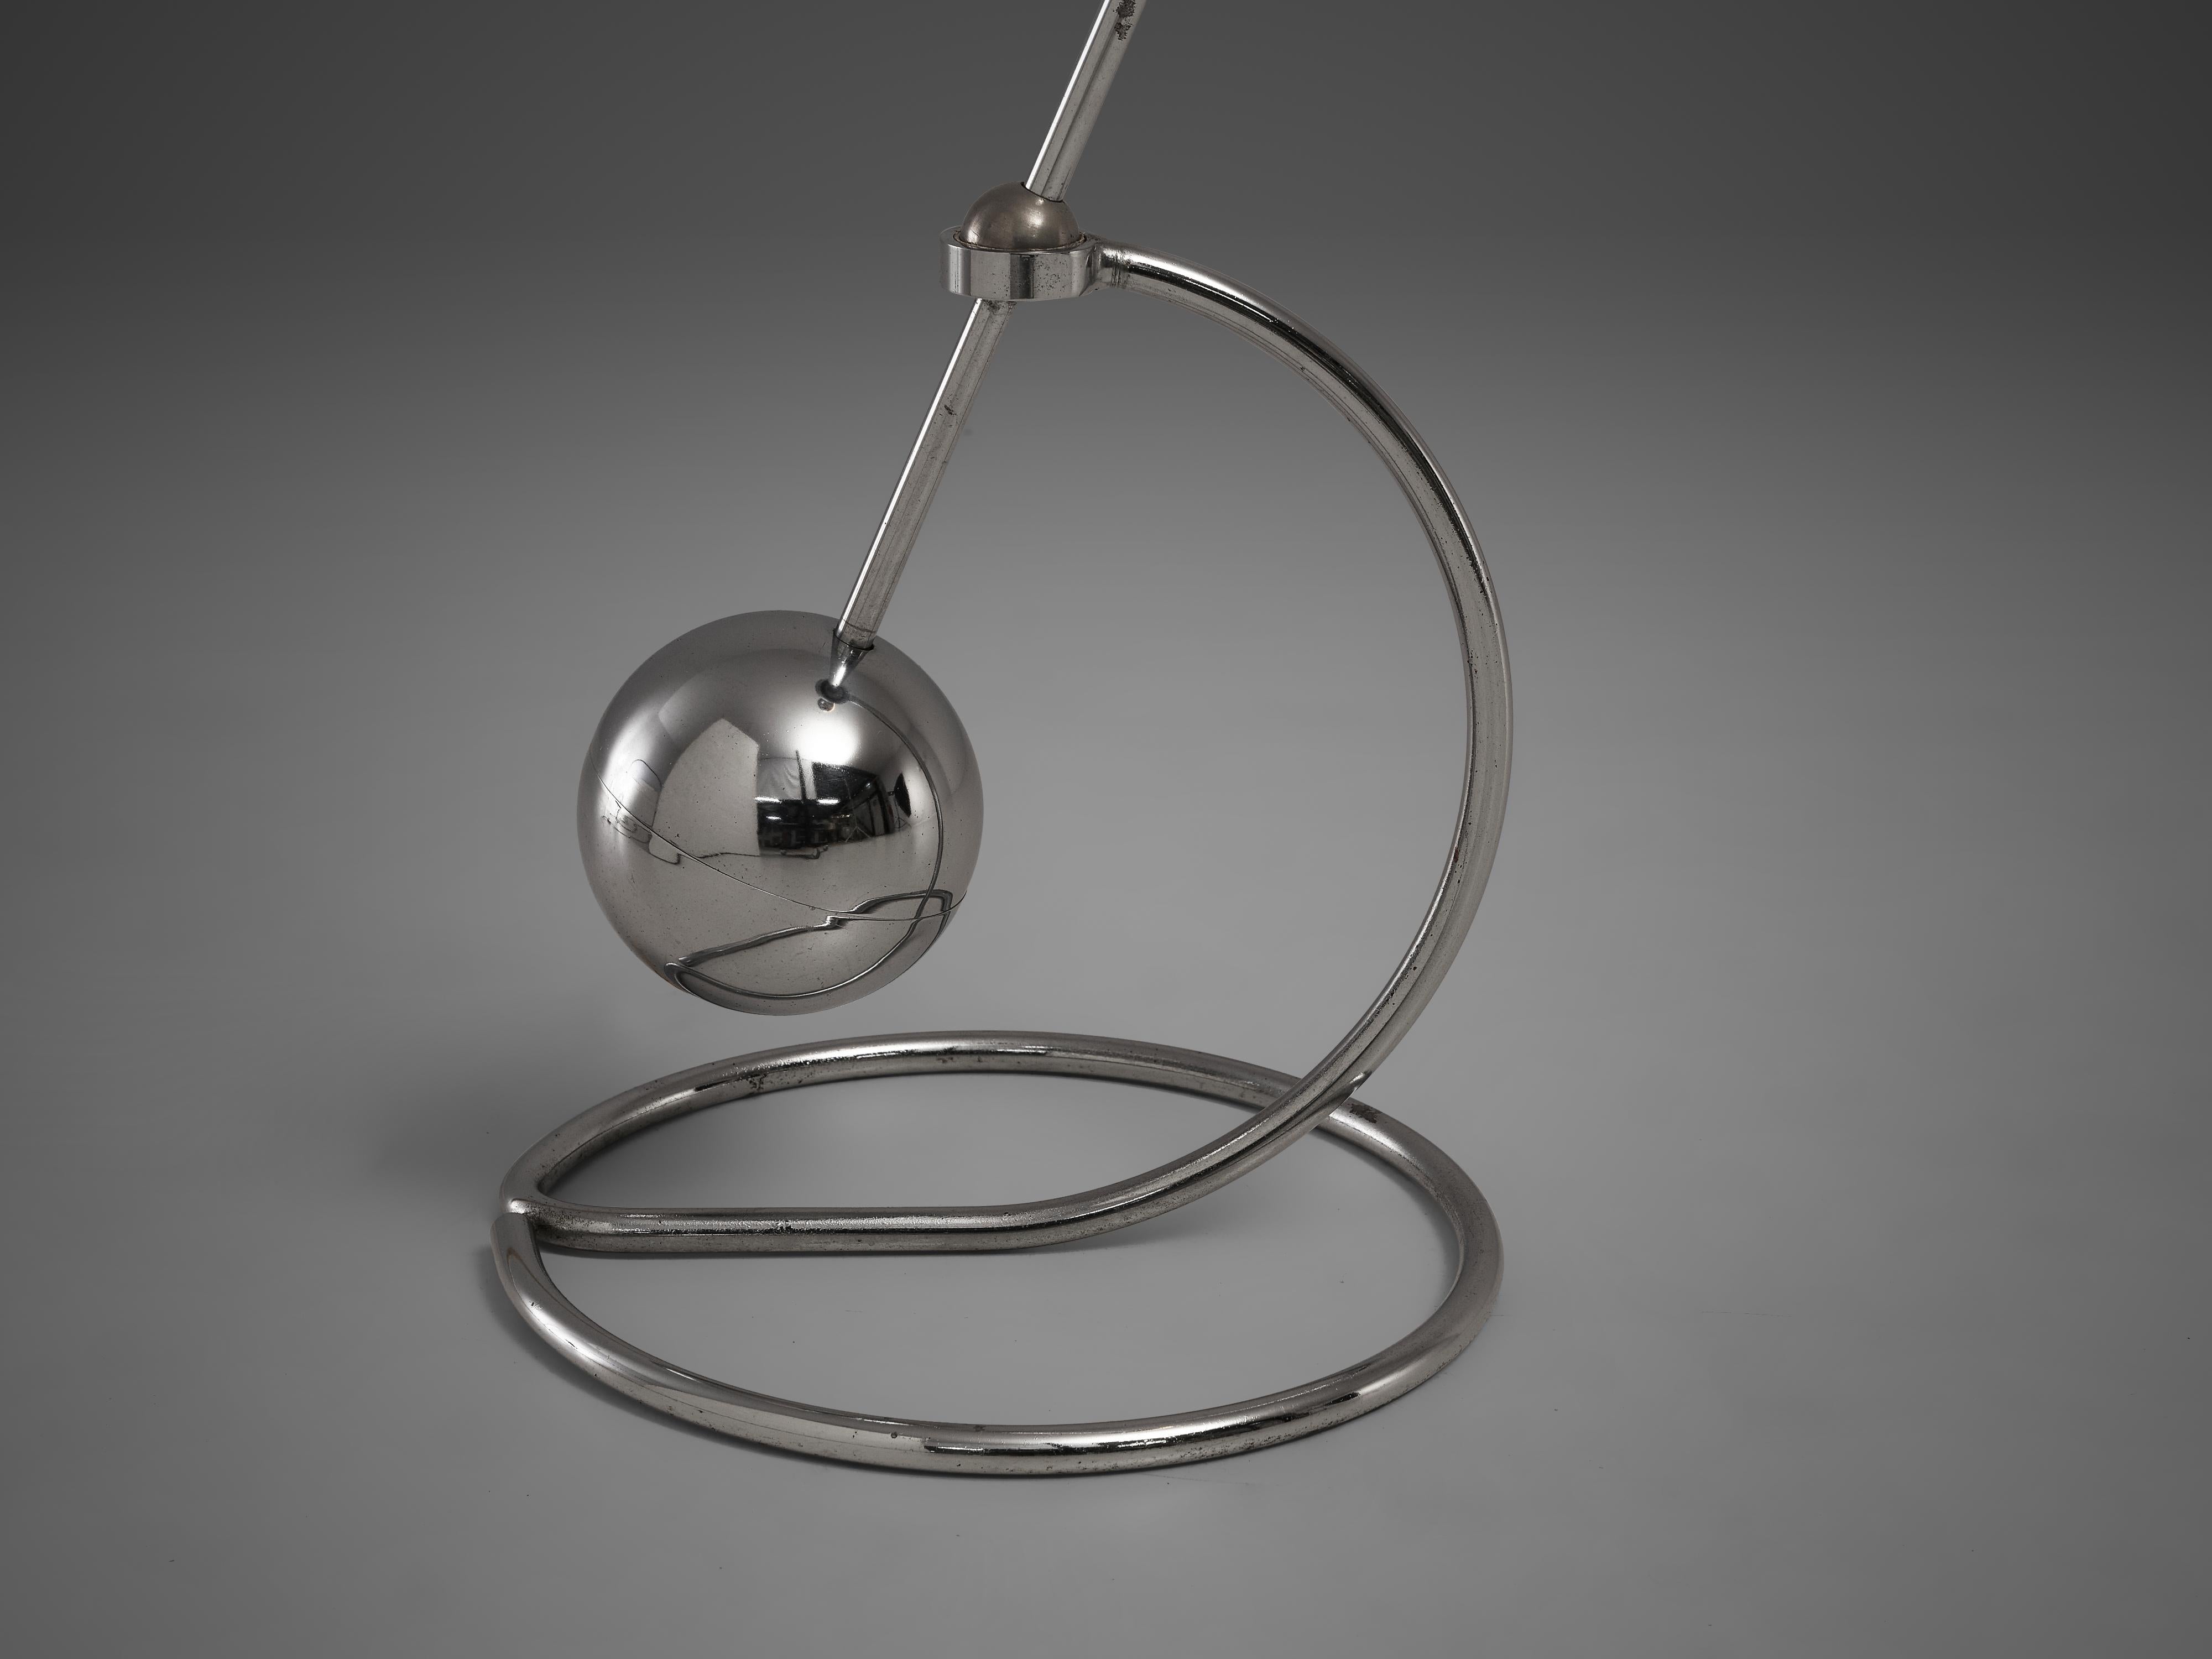 Late 20th Century Paolo Tilche Adjustable Floor Lamp Model 3S in Chrome-Plated Metal